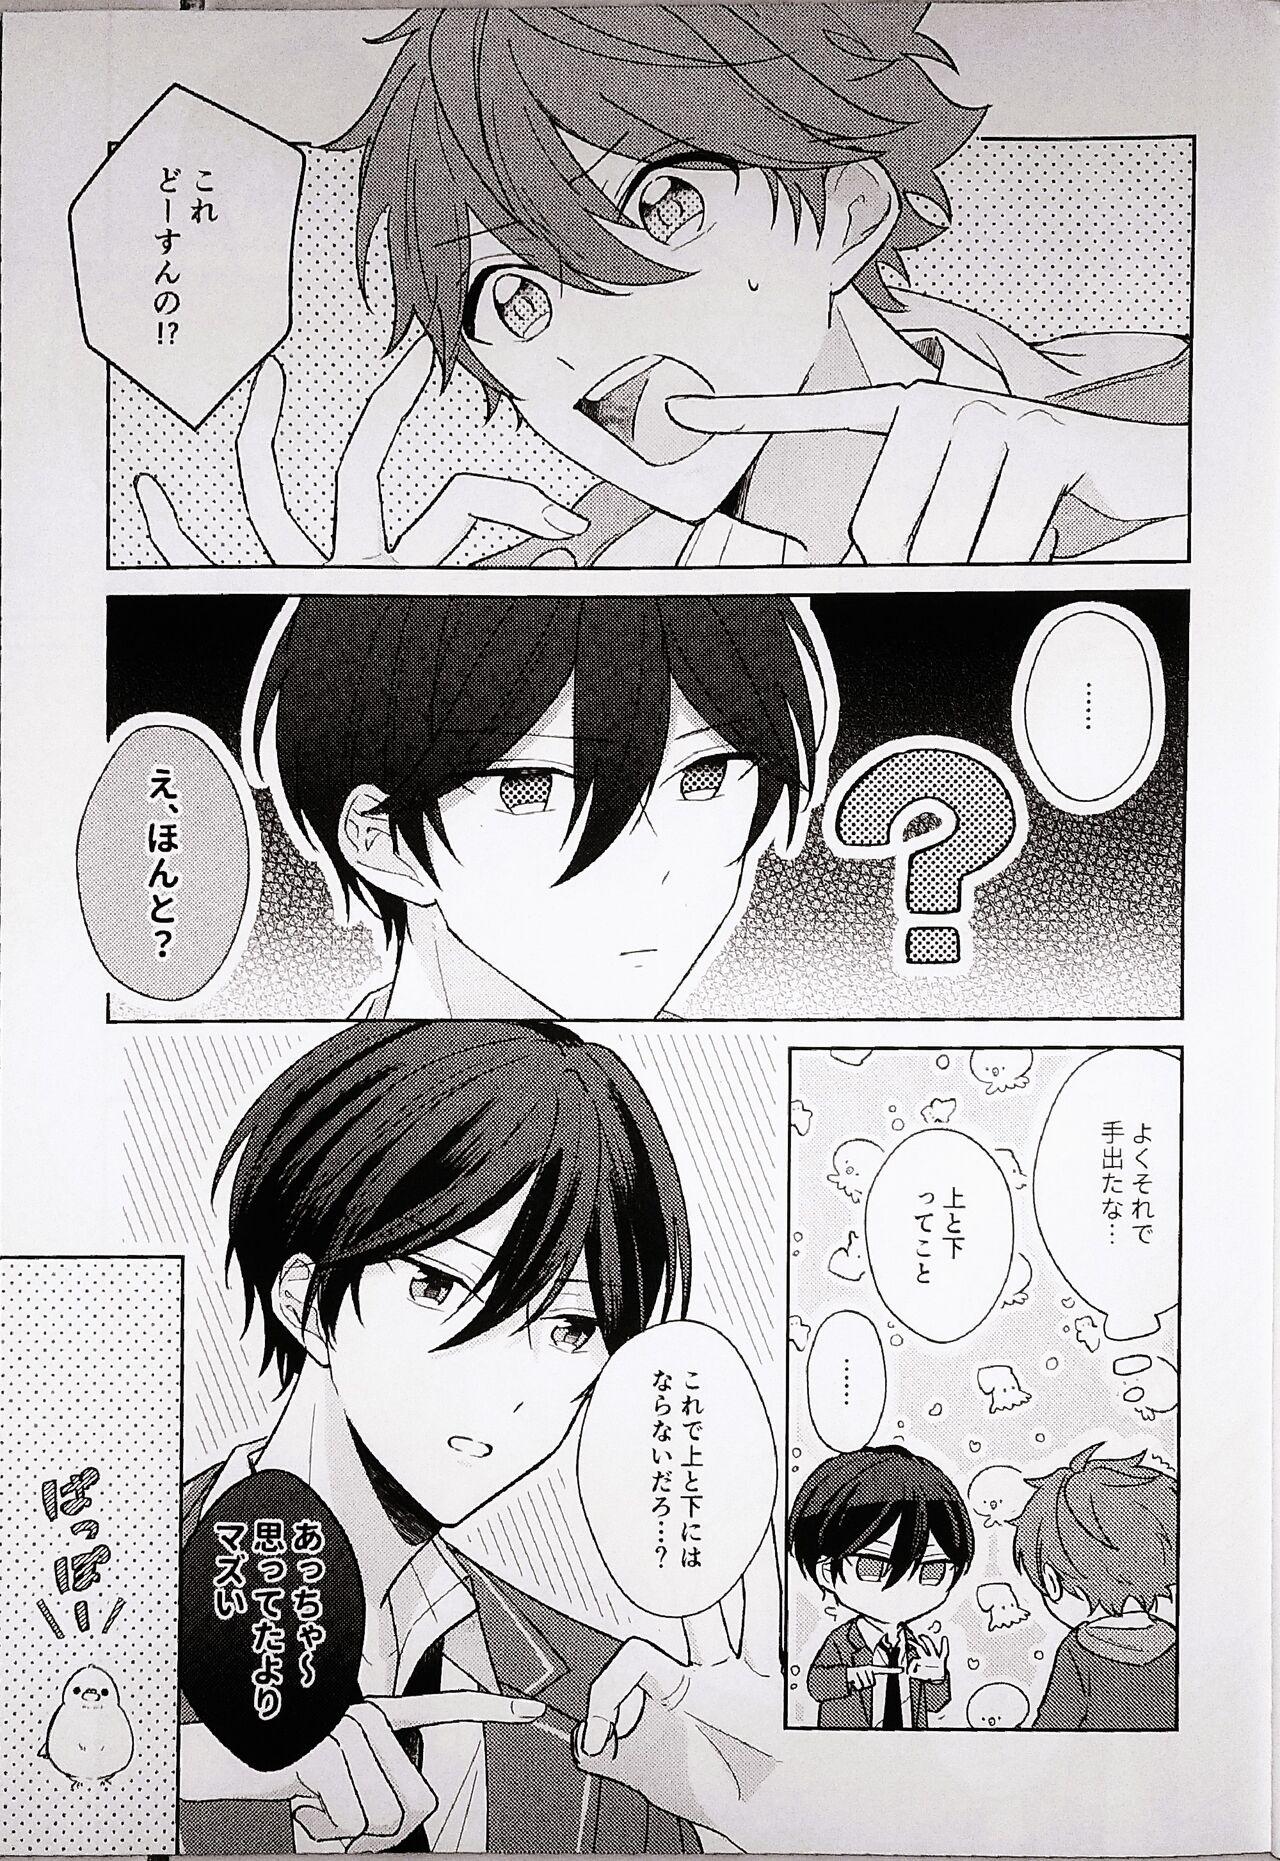 Caliente Kyou wa Koko made! - That's All For Today - Ensemble stars Granny - Page 11